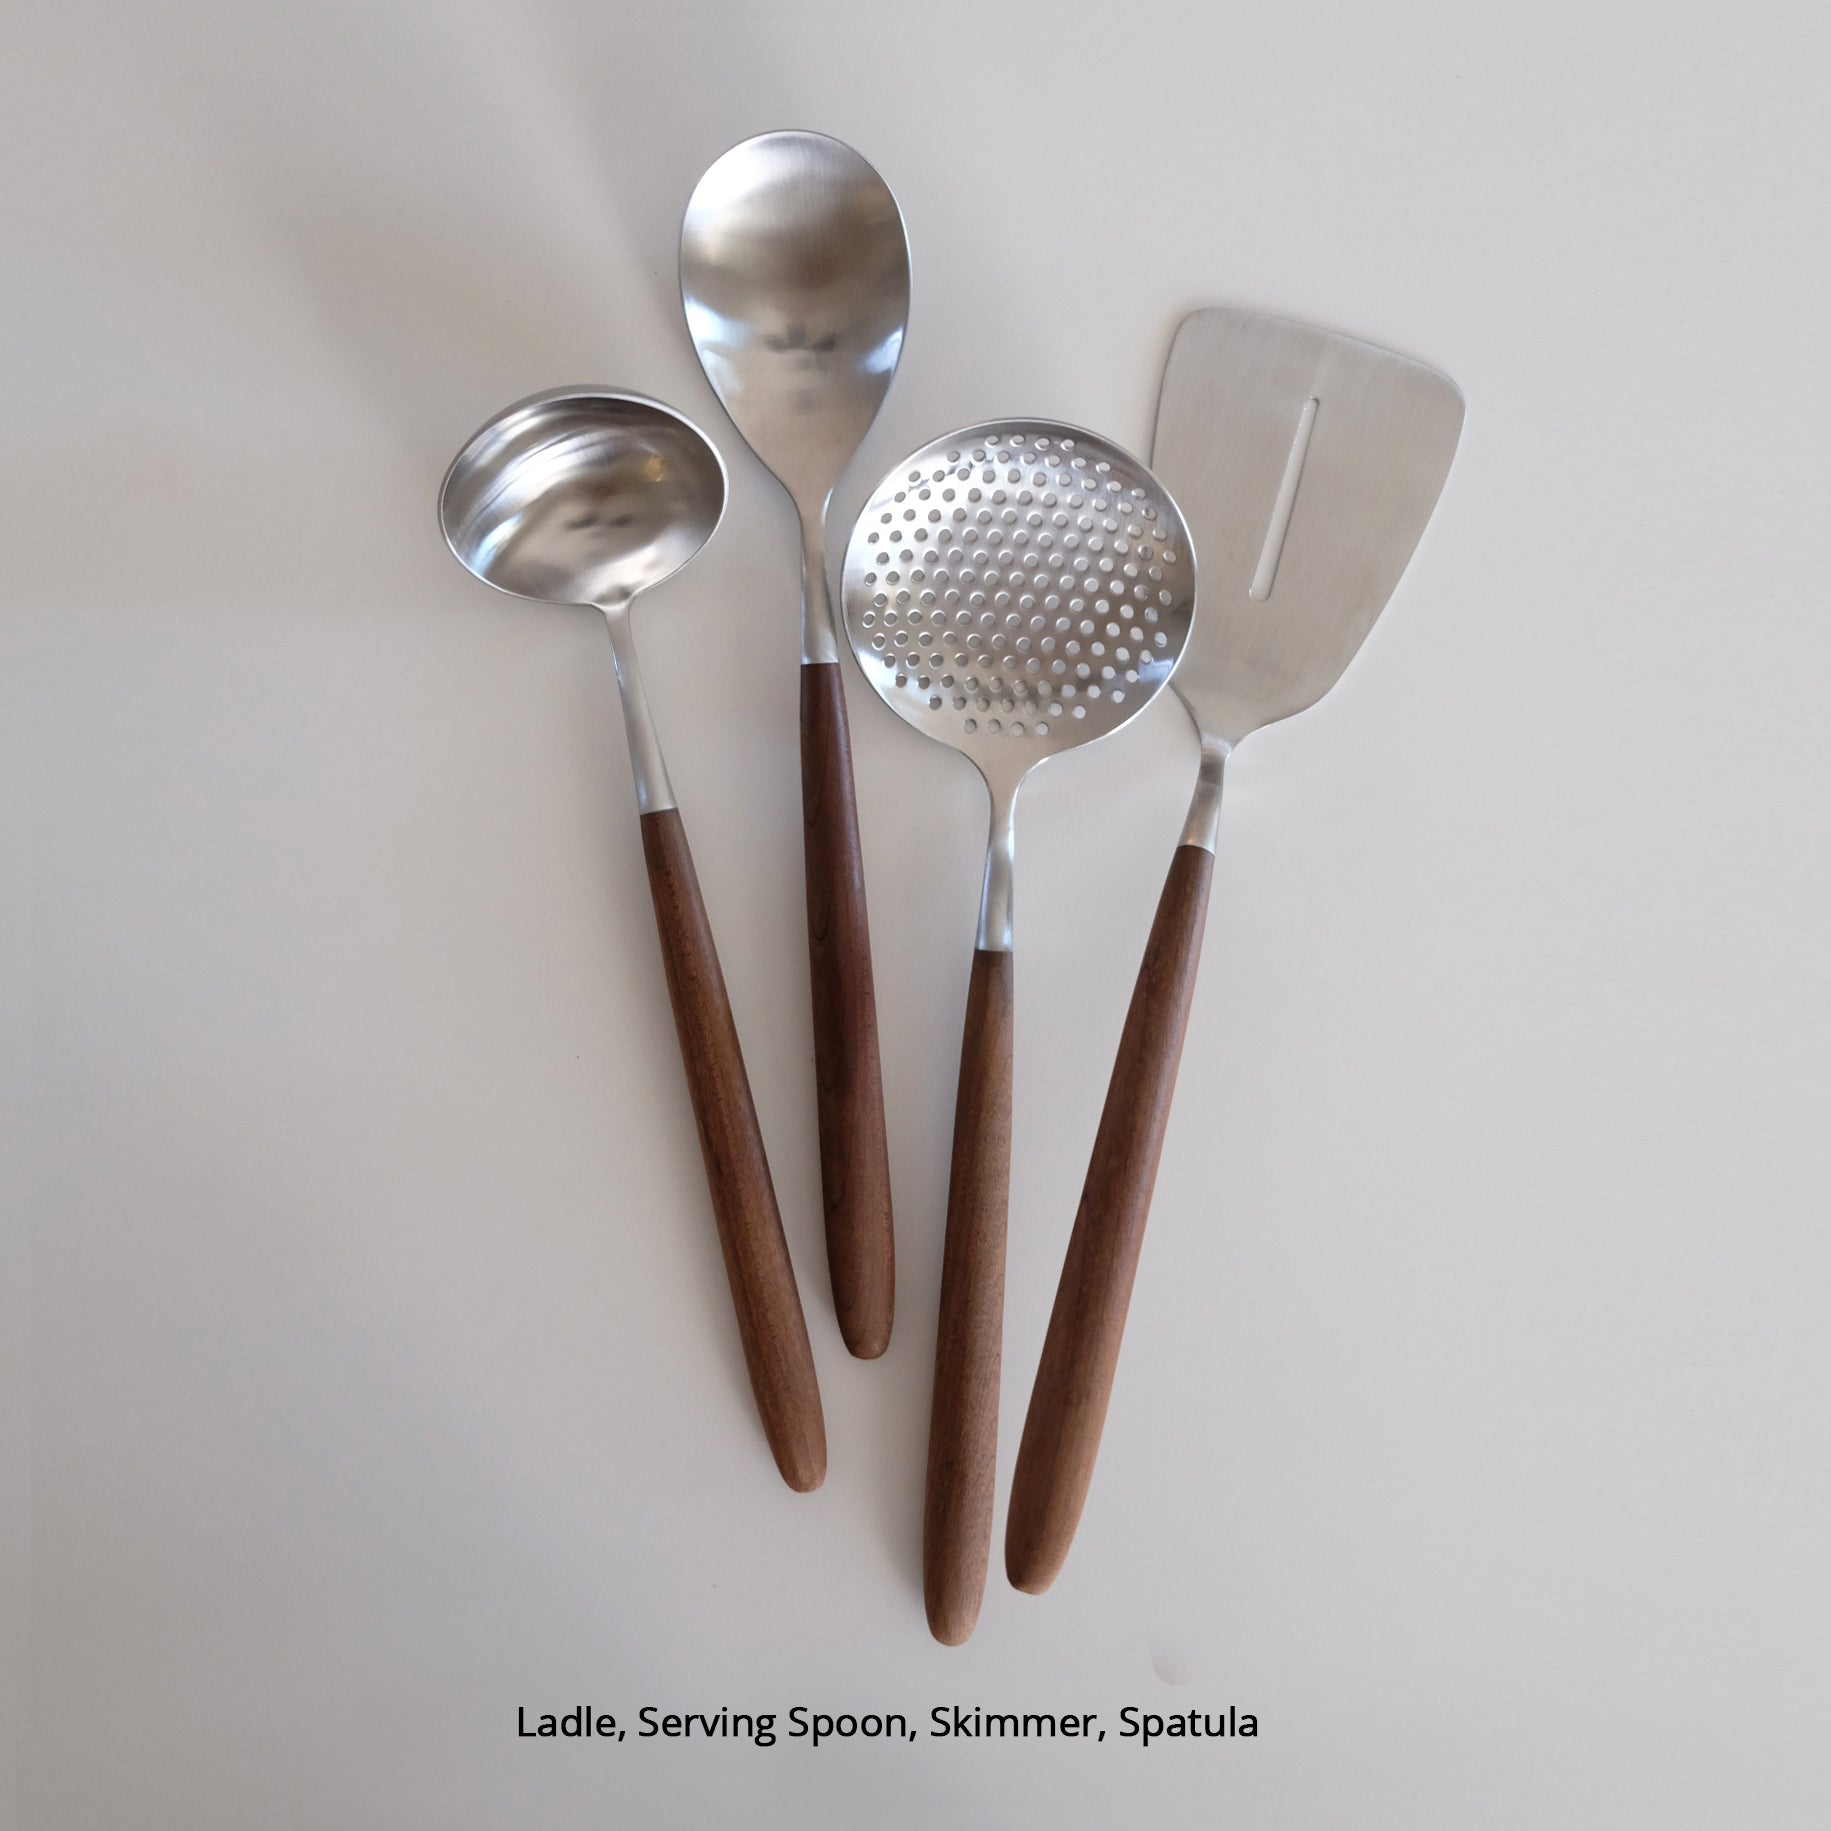 Summer Cooking with Japanese Kitchen Tools 夏のキッチン用品